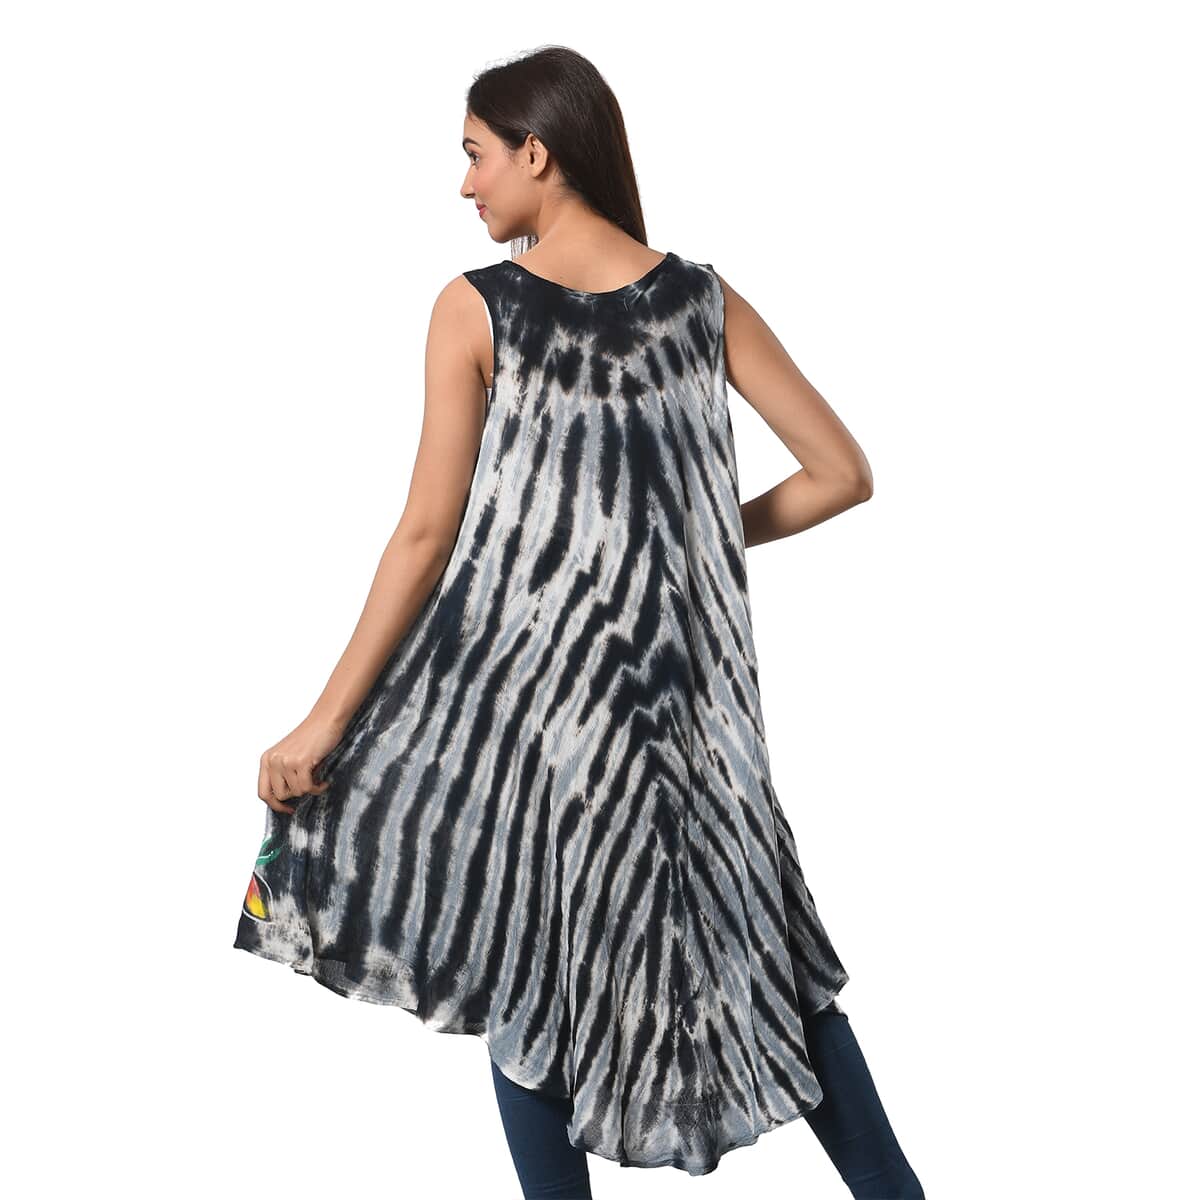 JOVIE Black Stripe Tie Dye with Floral Umbrella Dress - One Size Fits Most image number 2